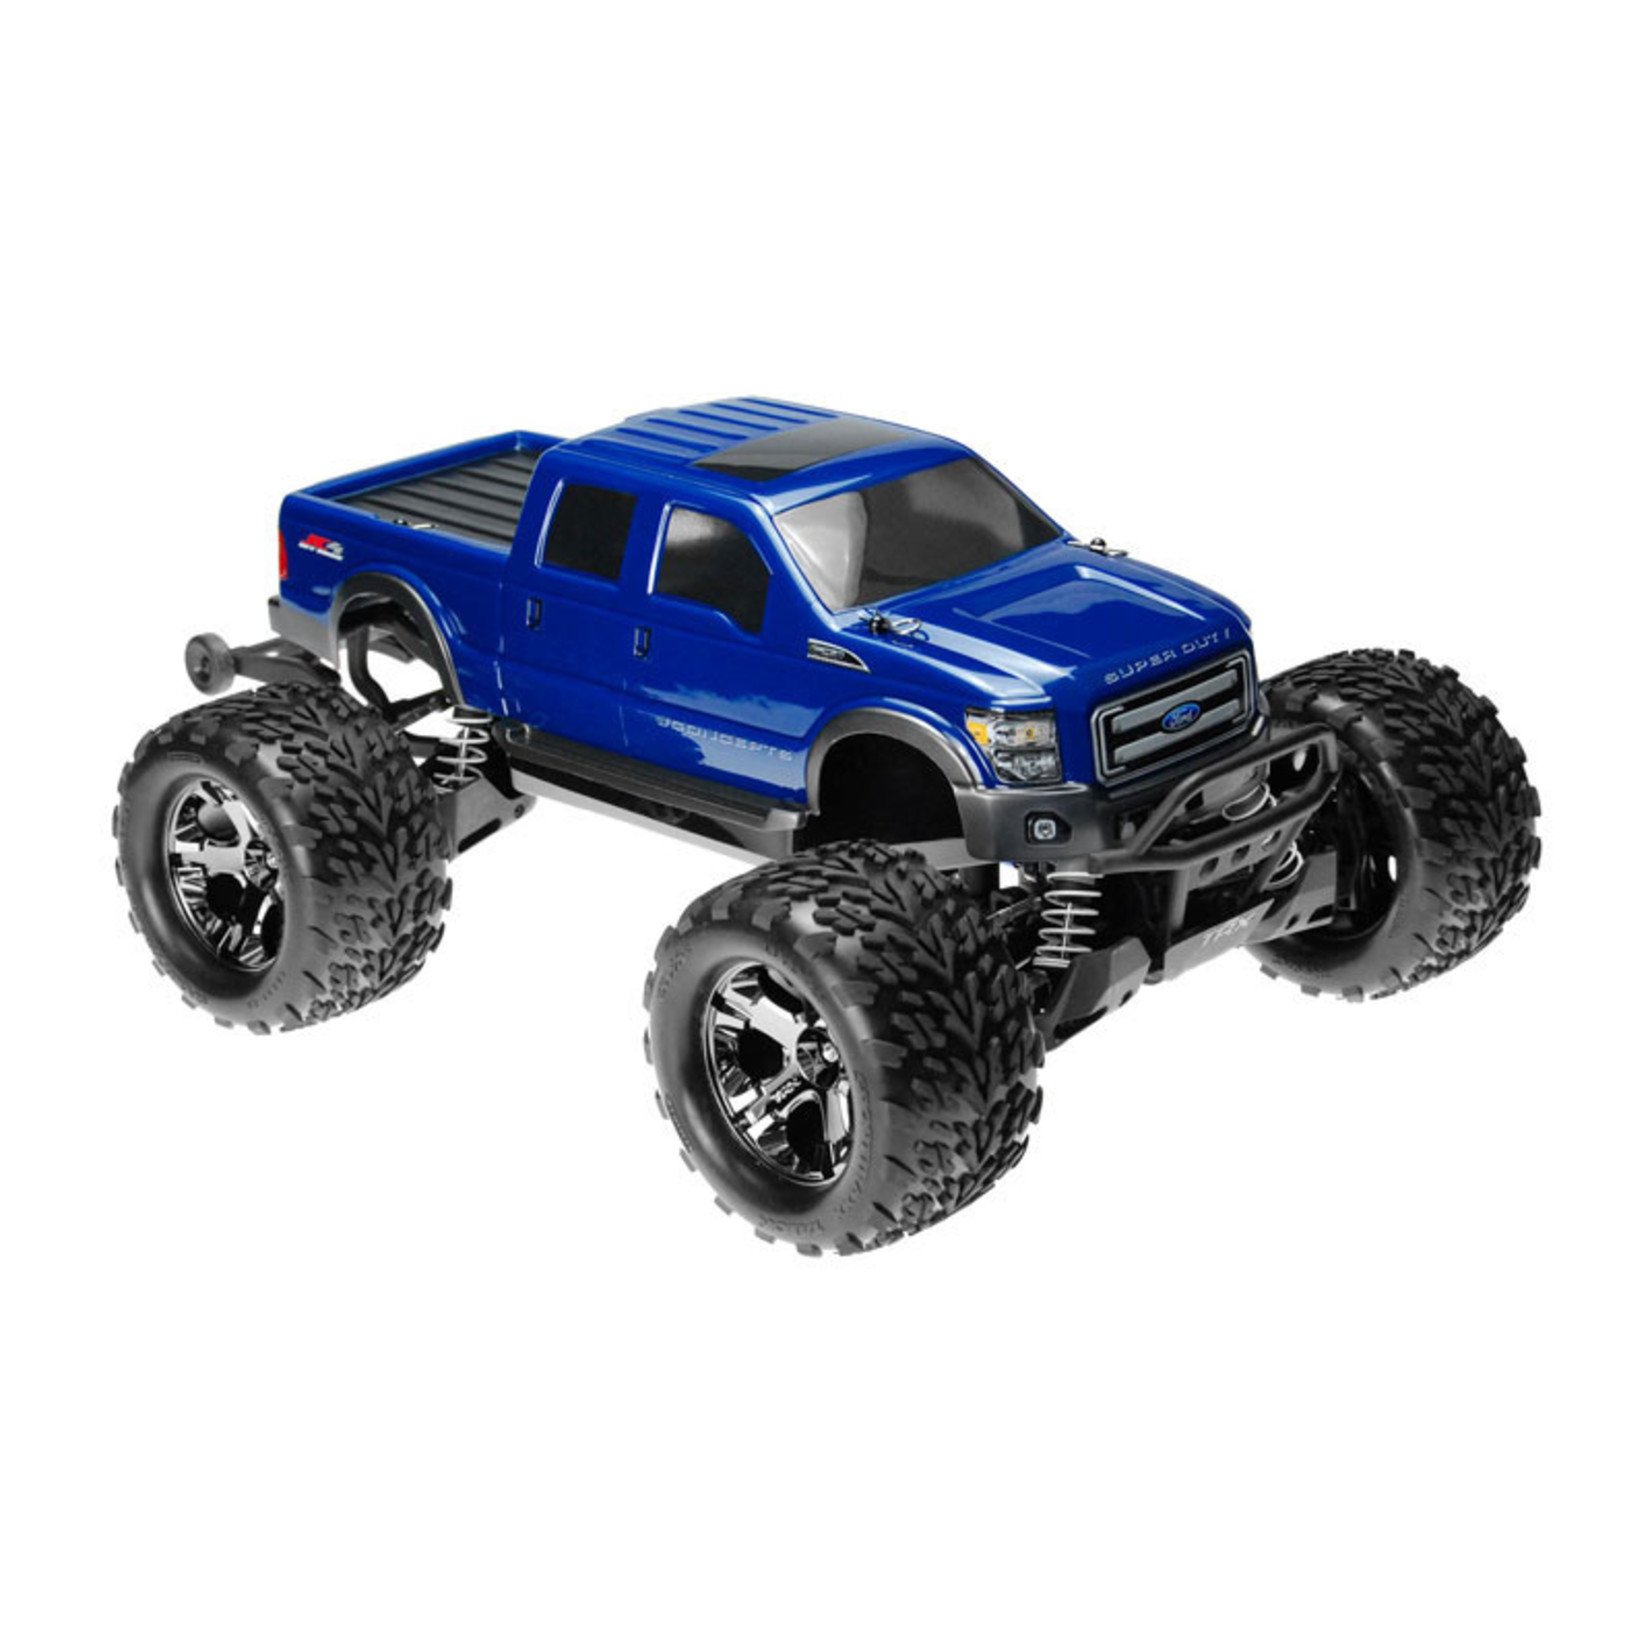 J Concepts JCO0214 - 2011 Ford F-250 Super Duty Body - fits Stampede 4X4 & 2WD